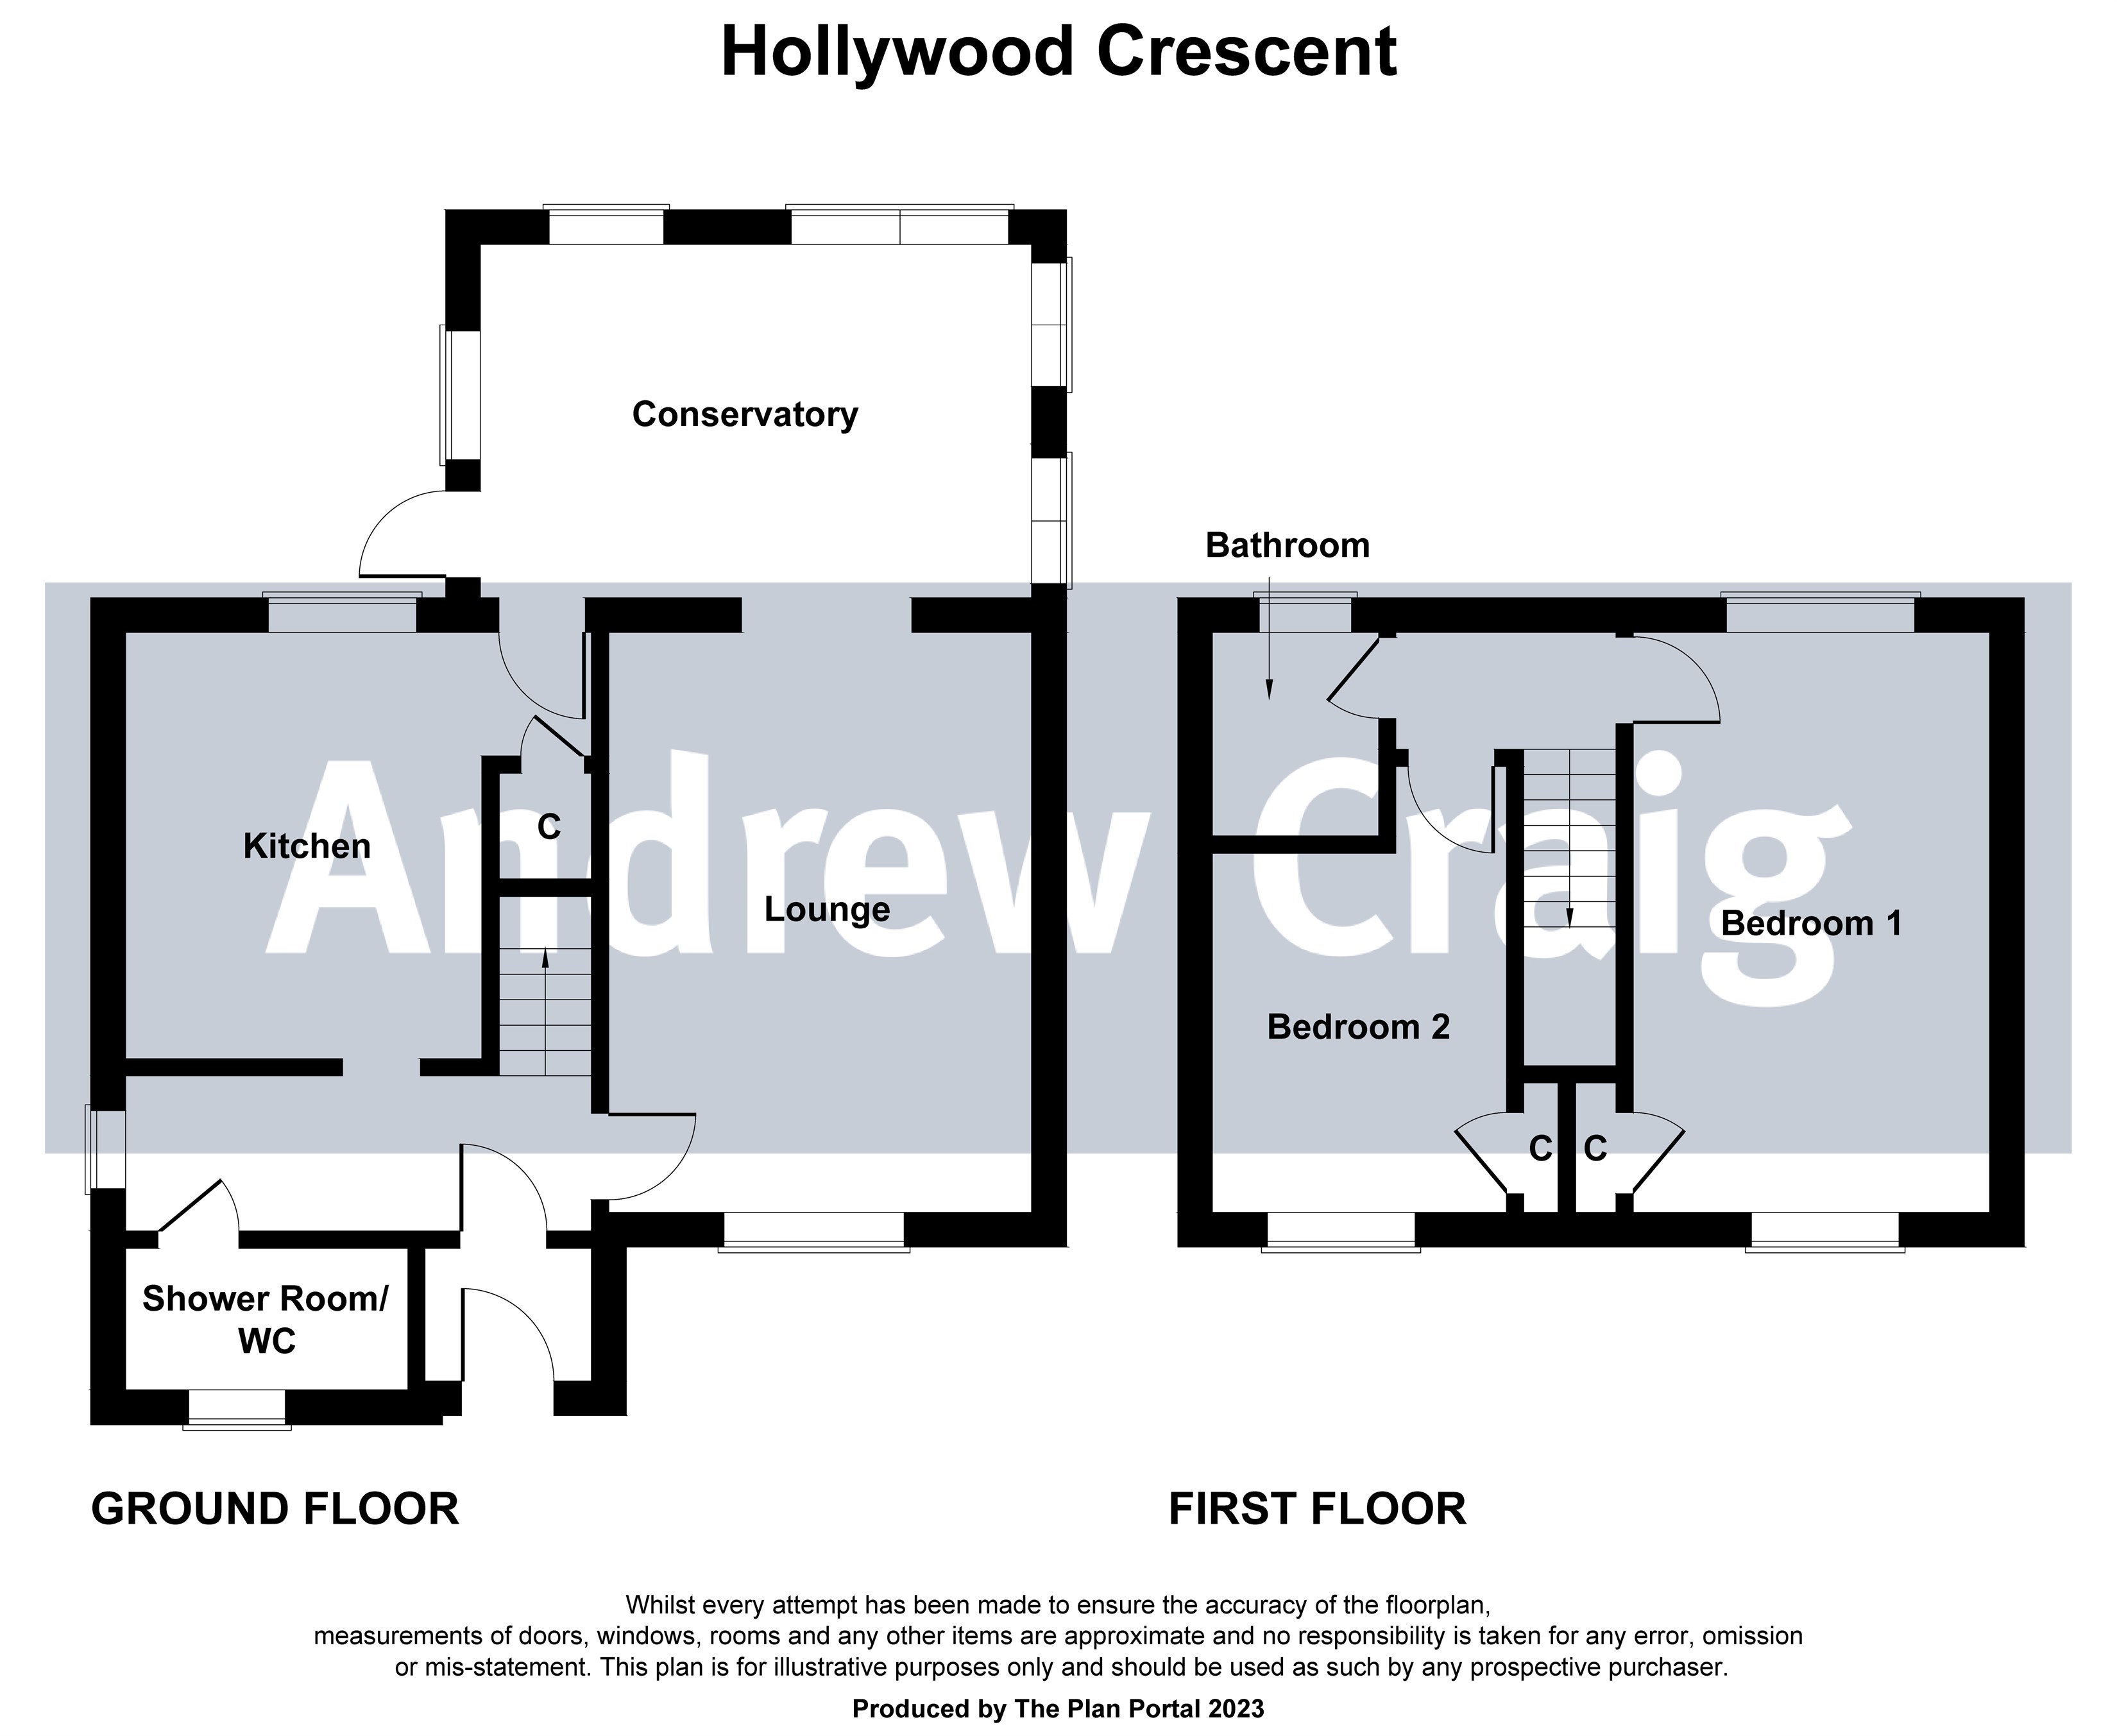 2 bed semi-detached house for sale in Hollywood Crescent, Gosforth - Property floorplan